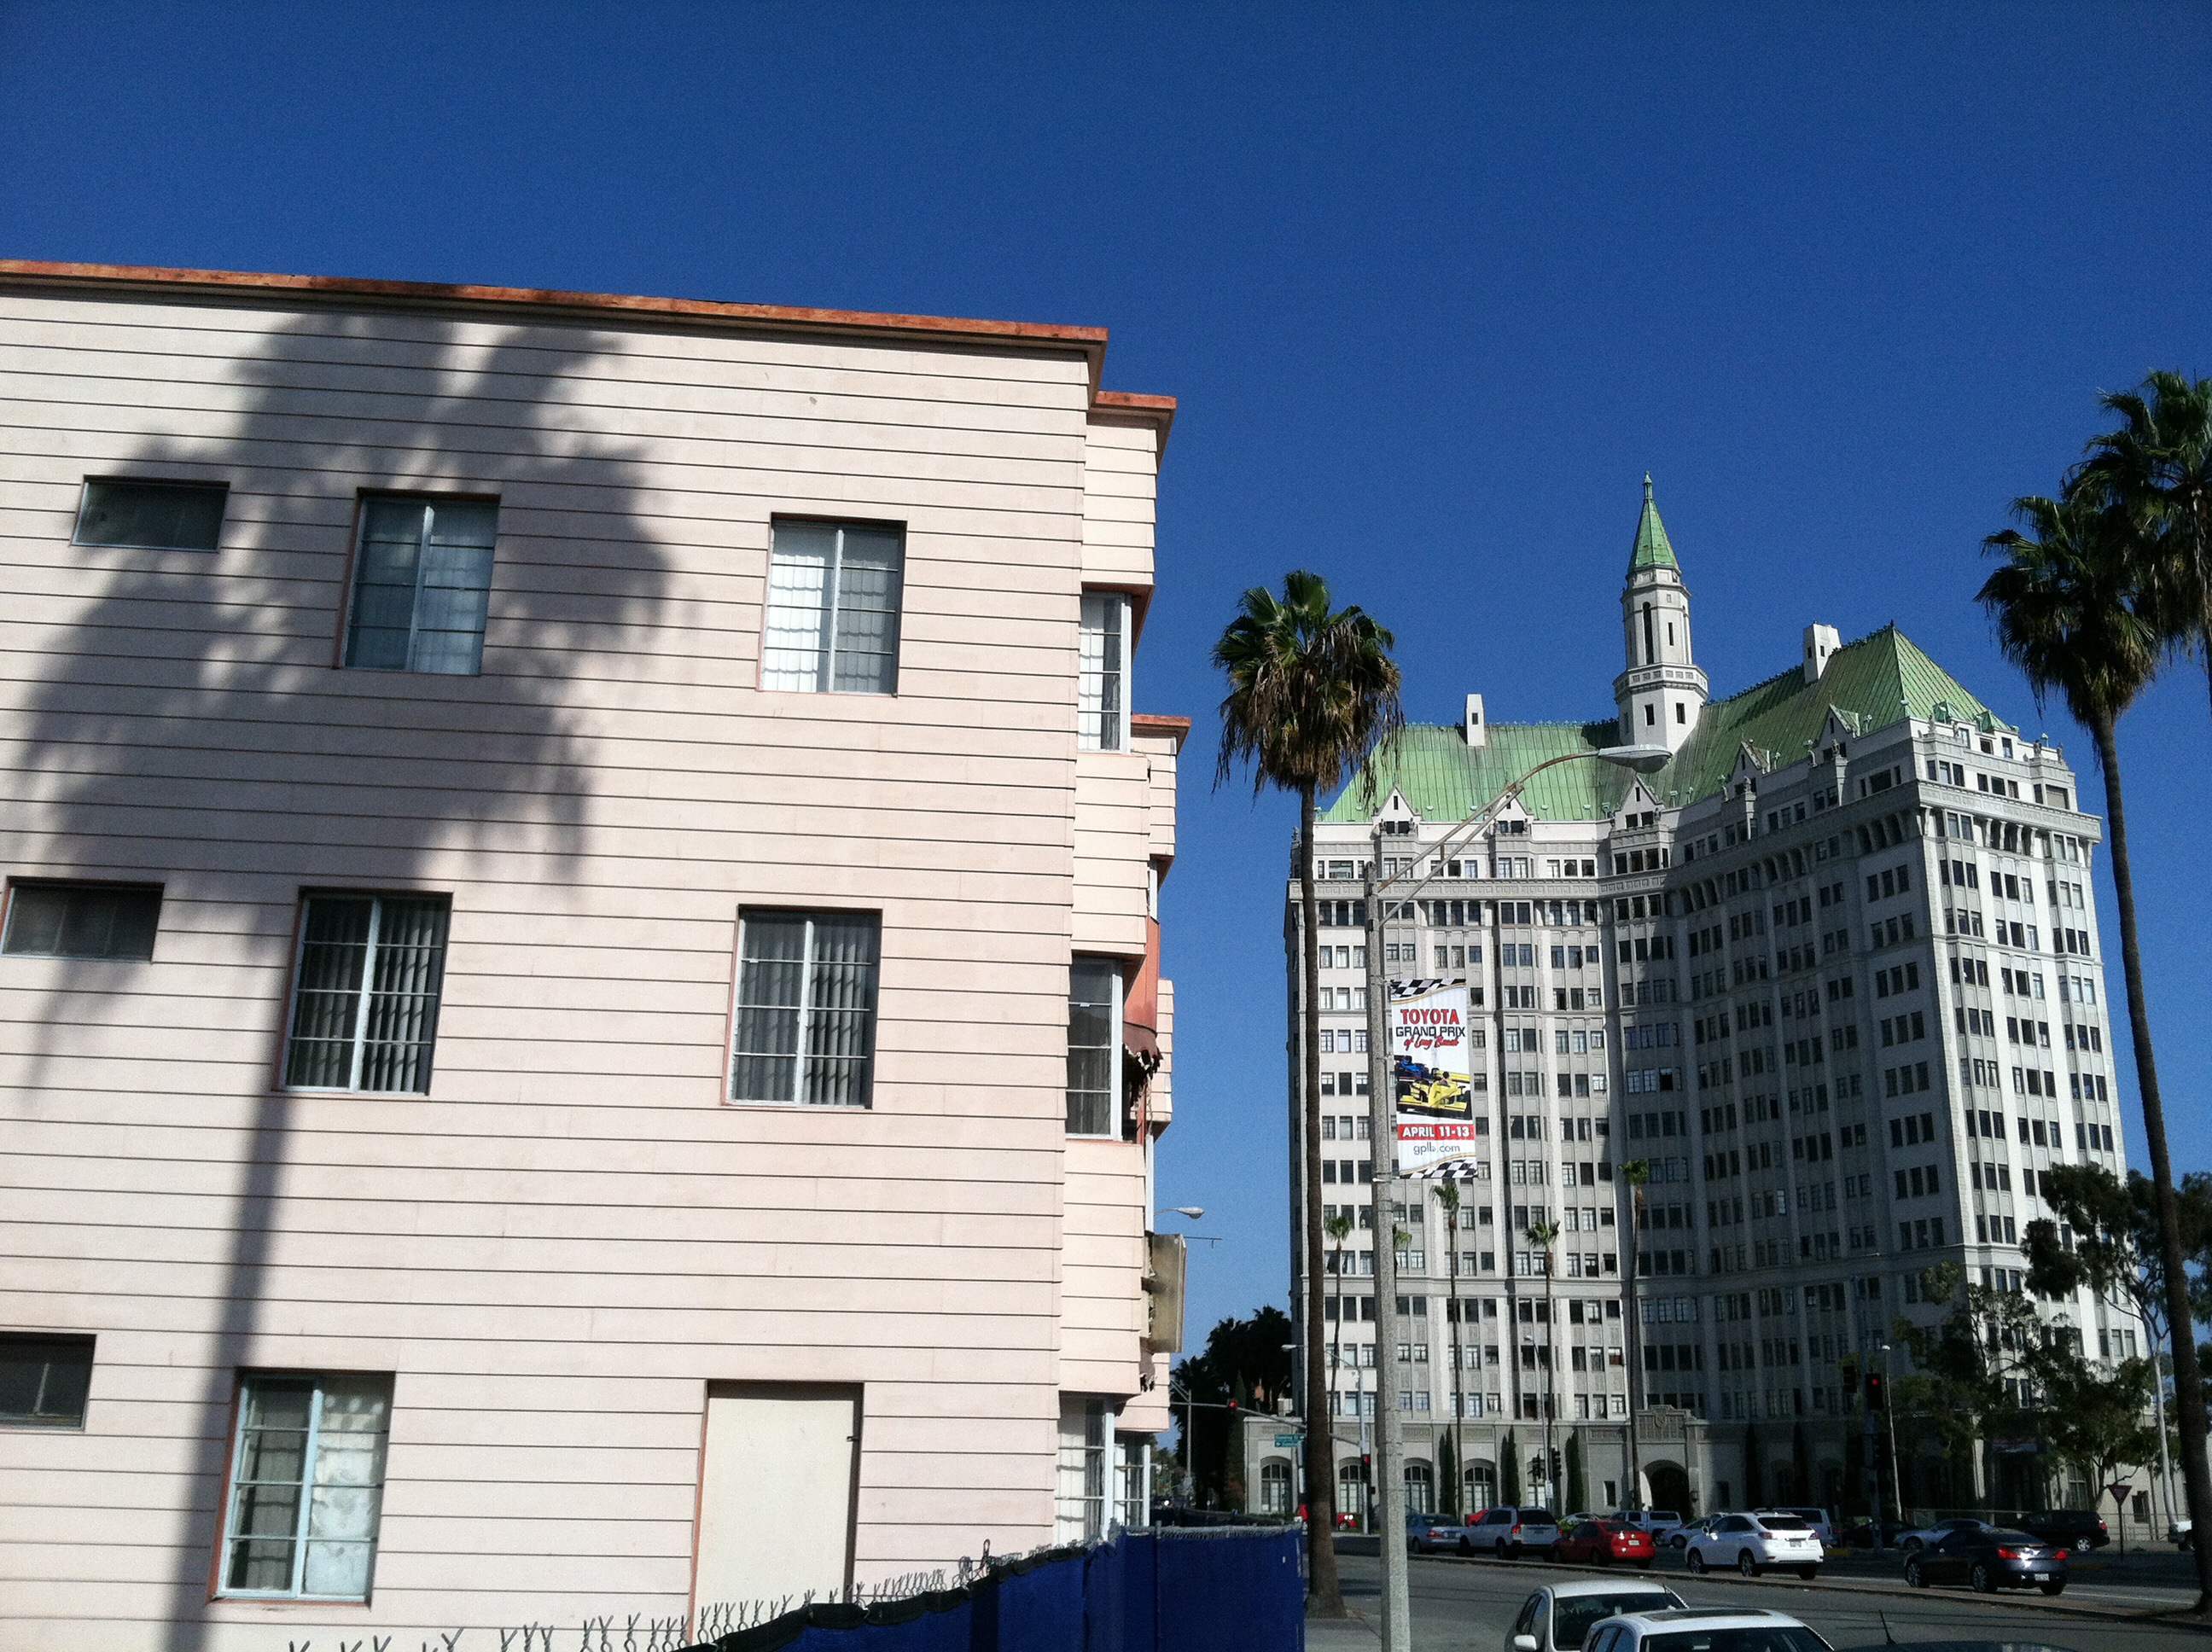 View of apartments in Long Beach